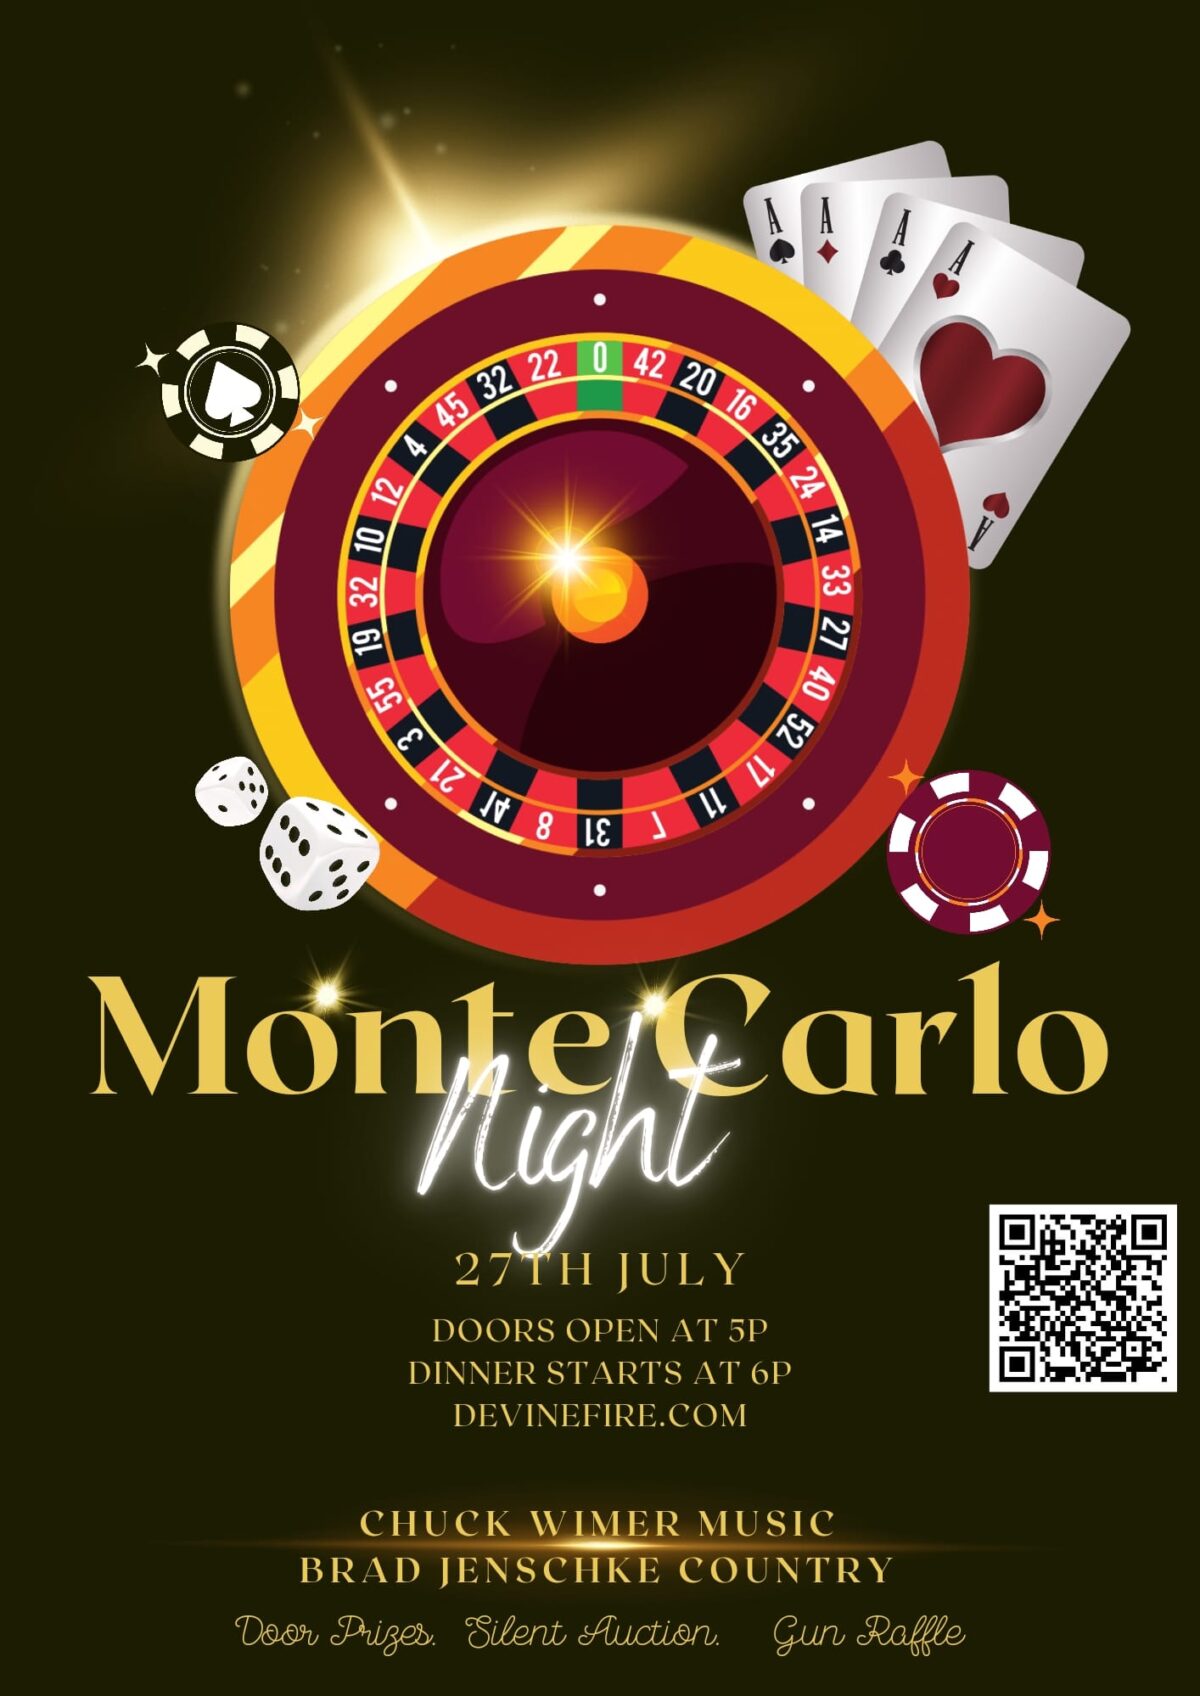 Monte Carlo night this weekend